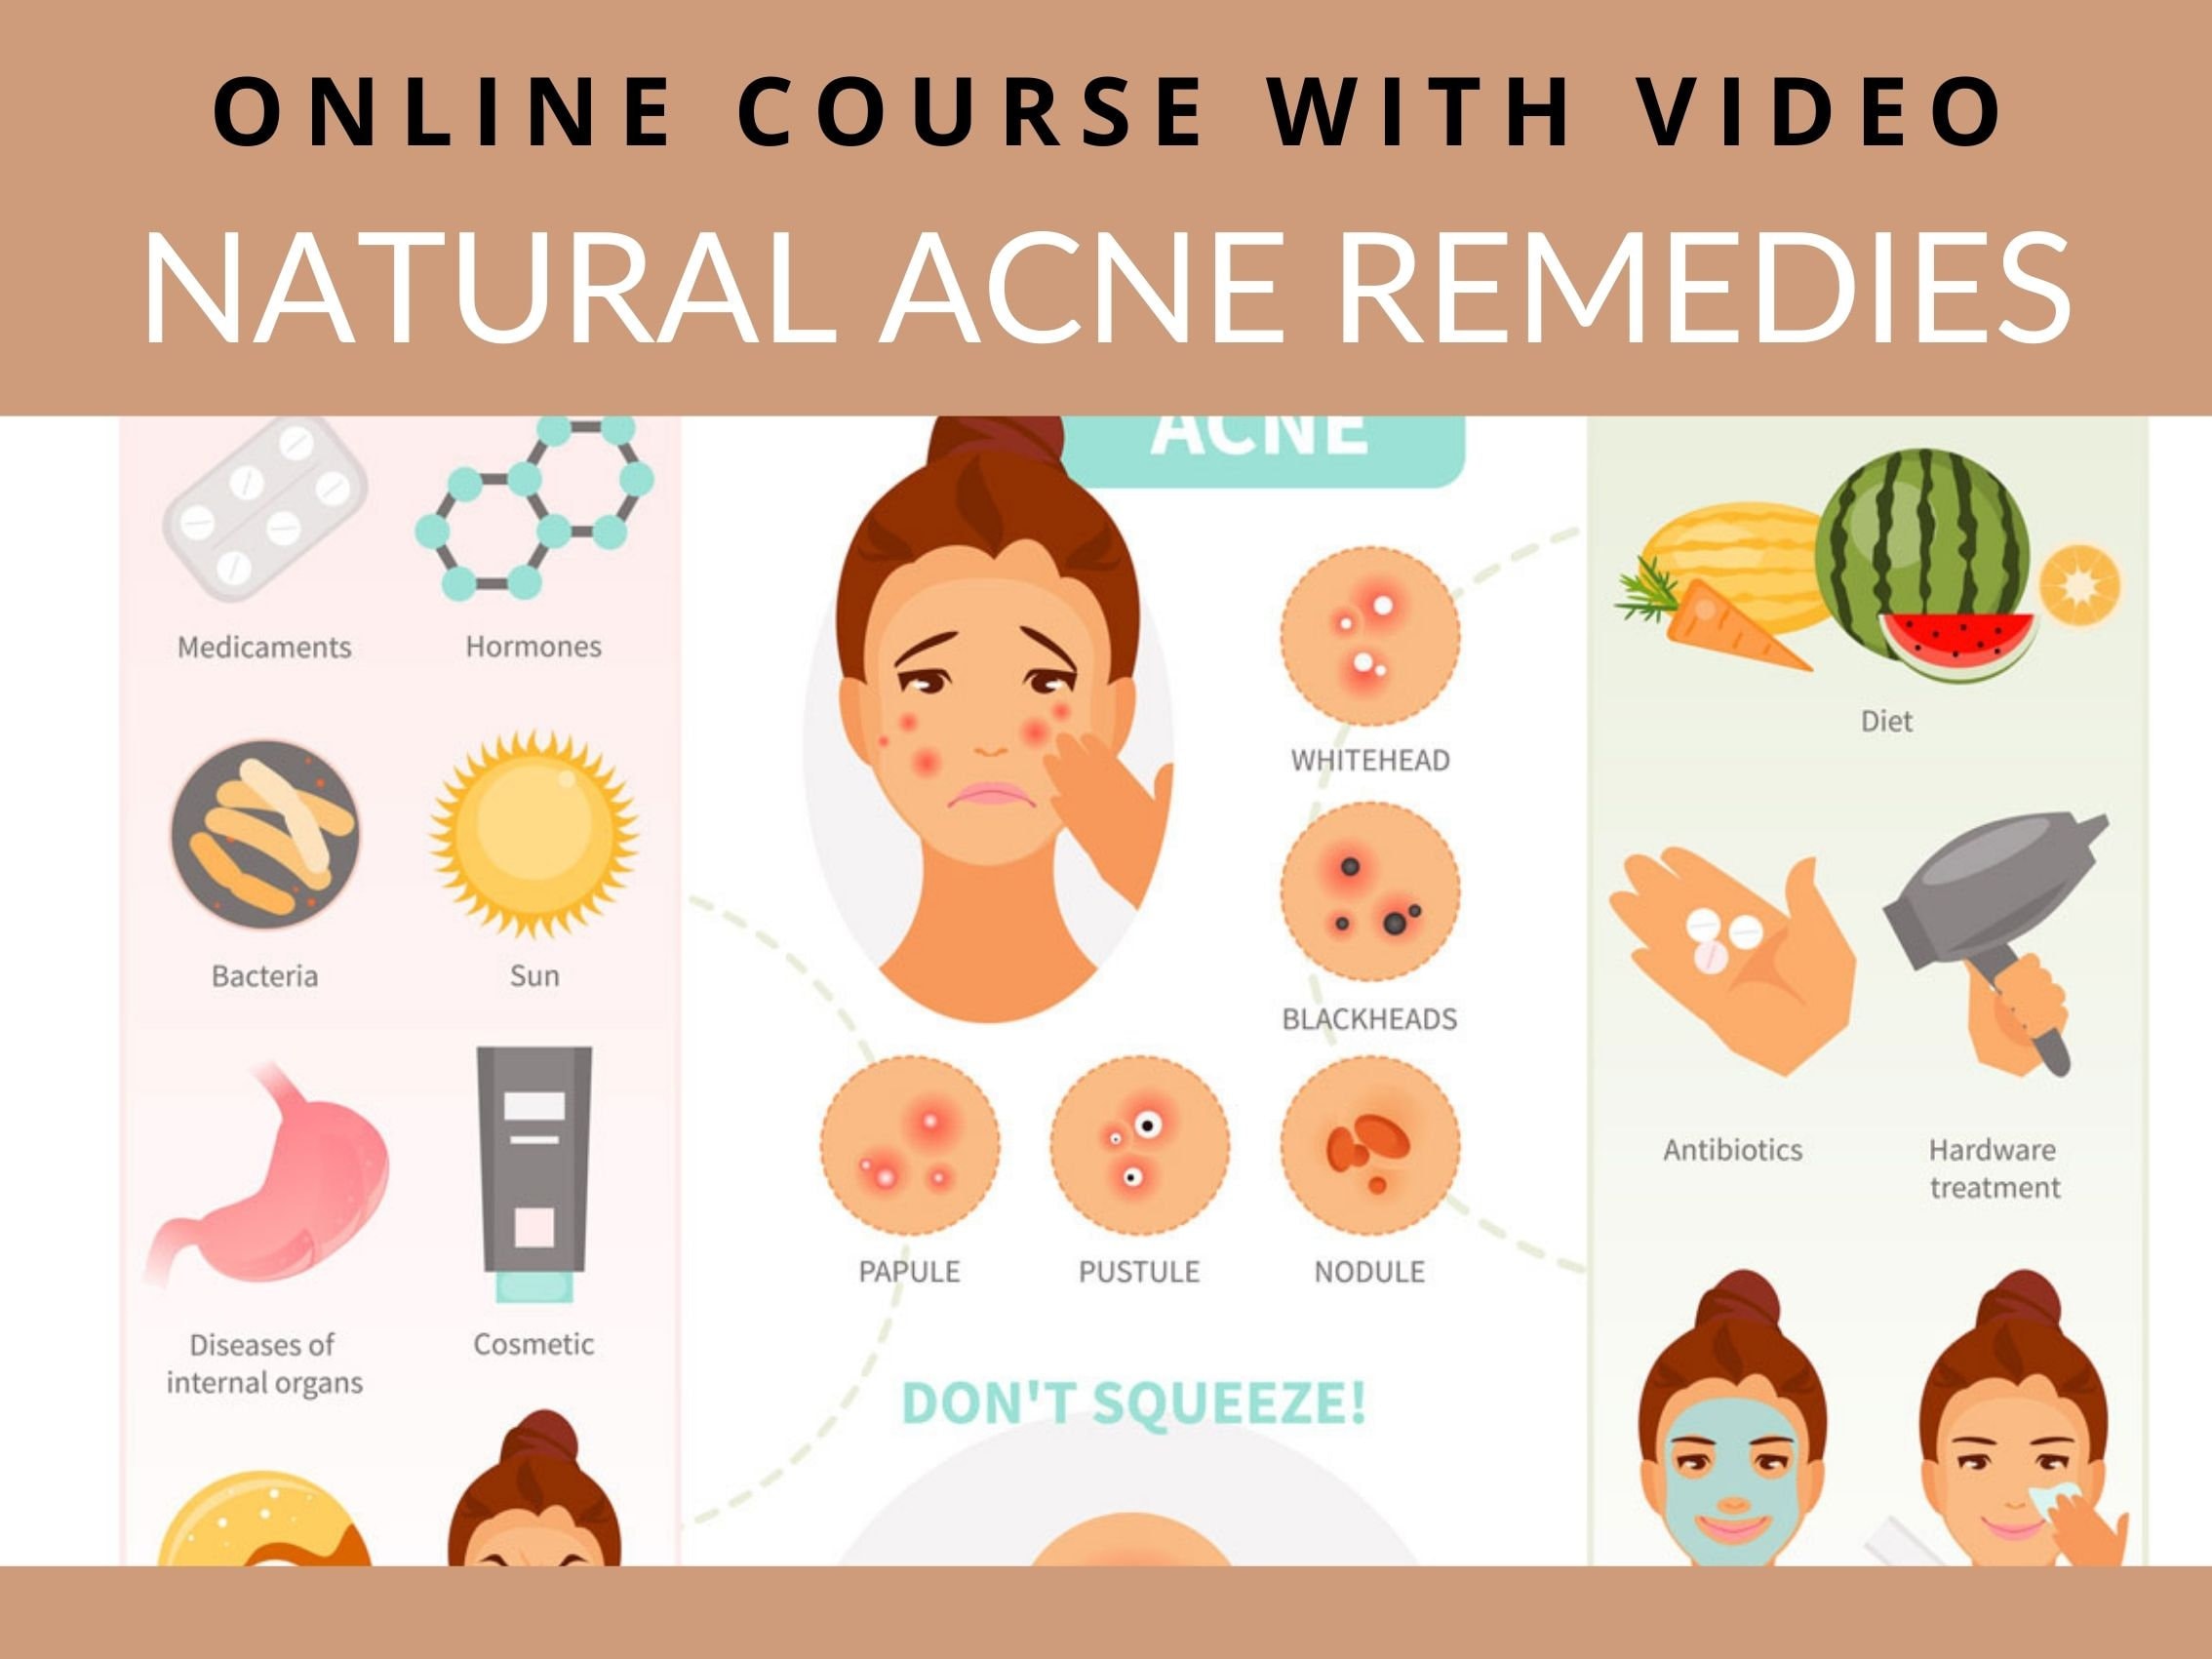 Natural Acne Remedies You Can Make at Home image